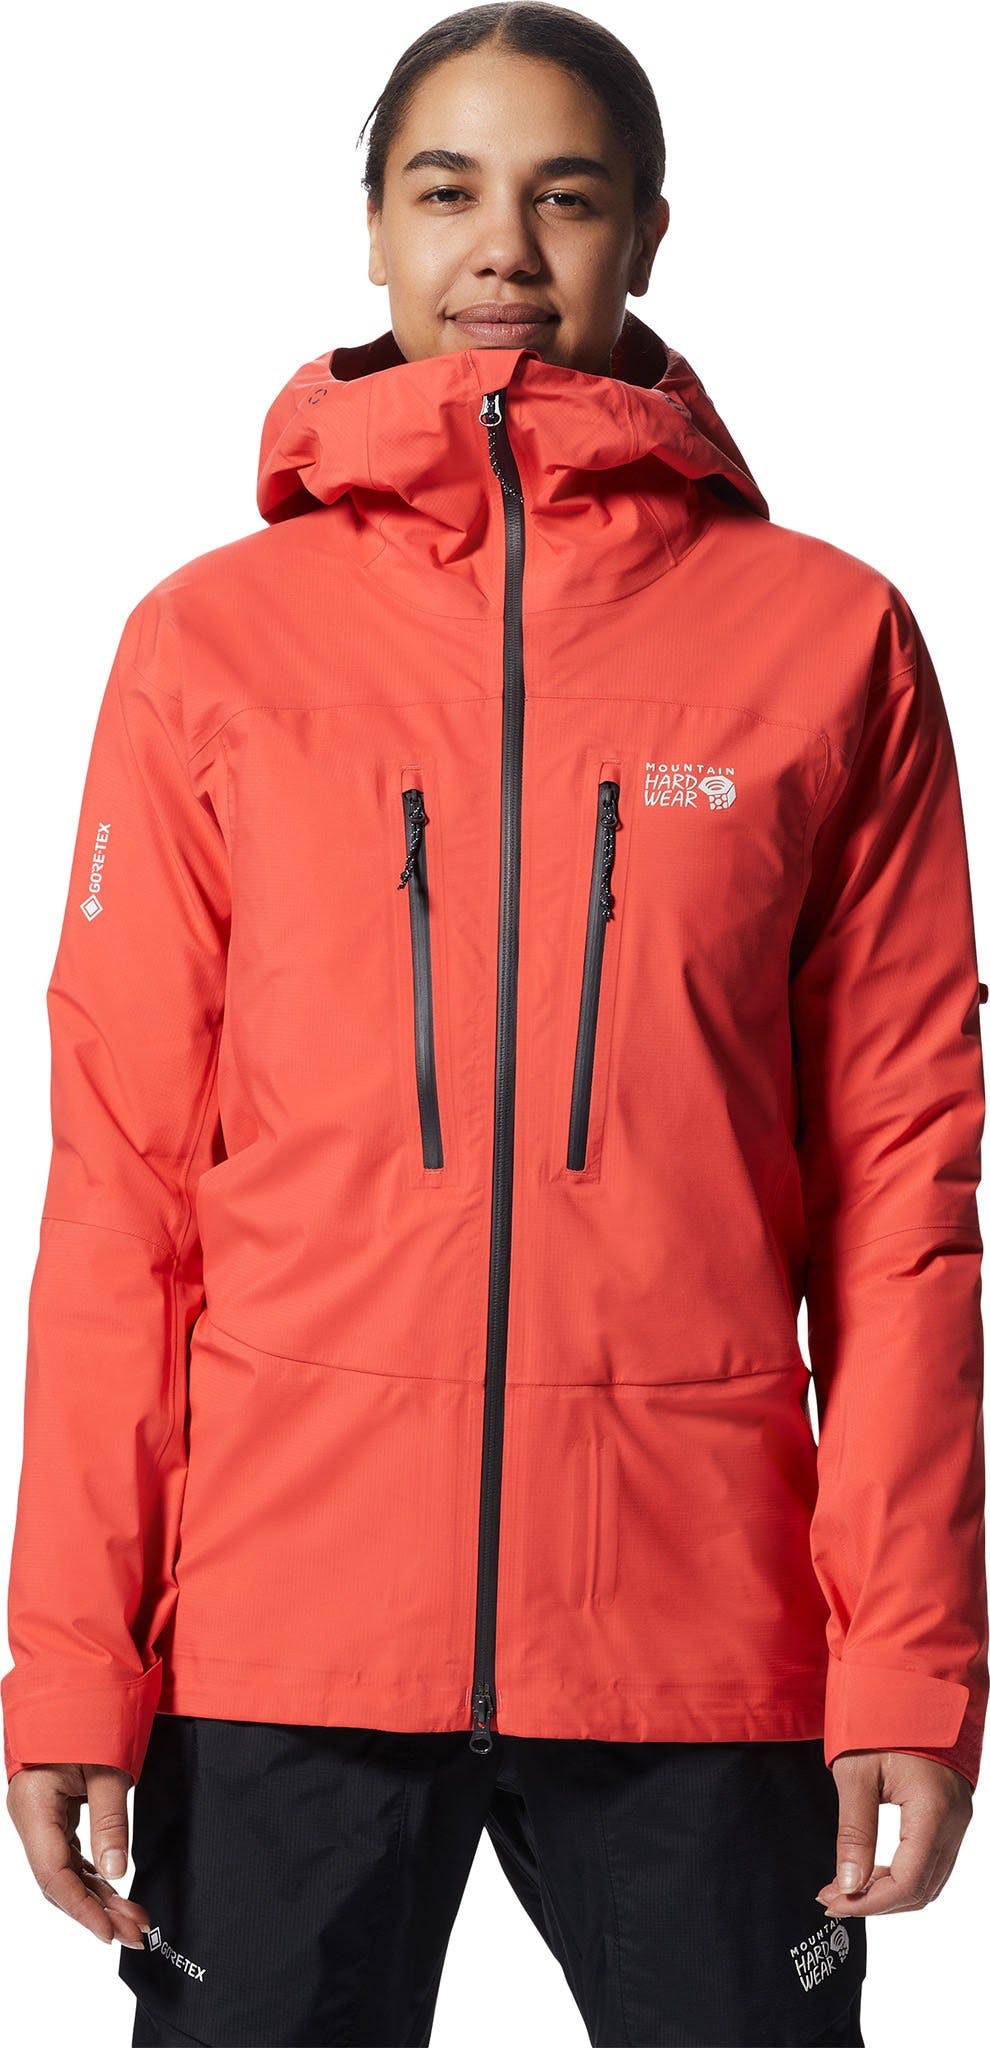 Product image for High Exposure™ GORE-TEX C-Knit Jacket - Women's